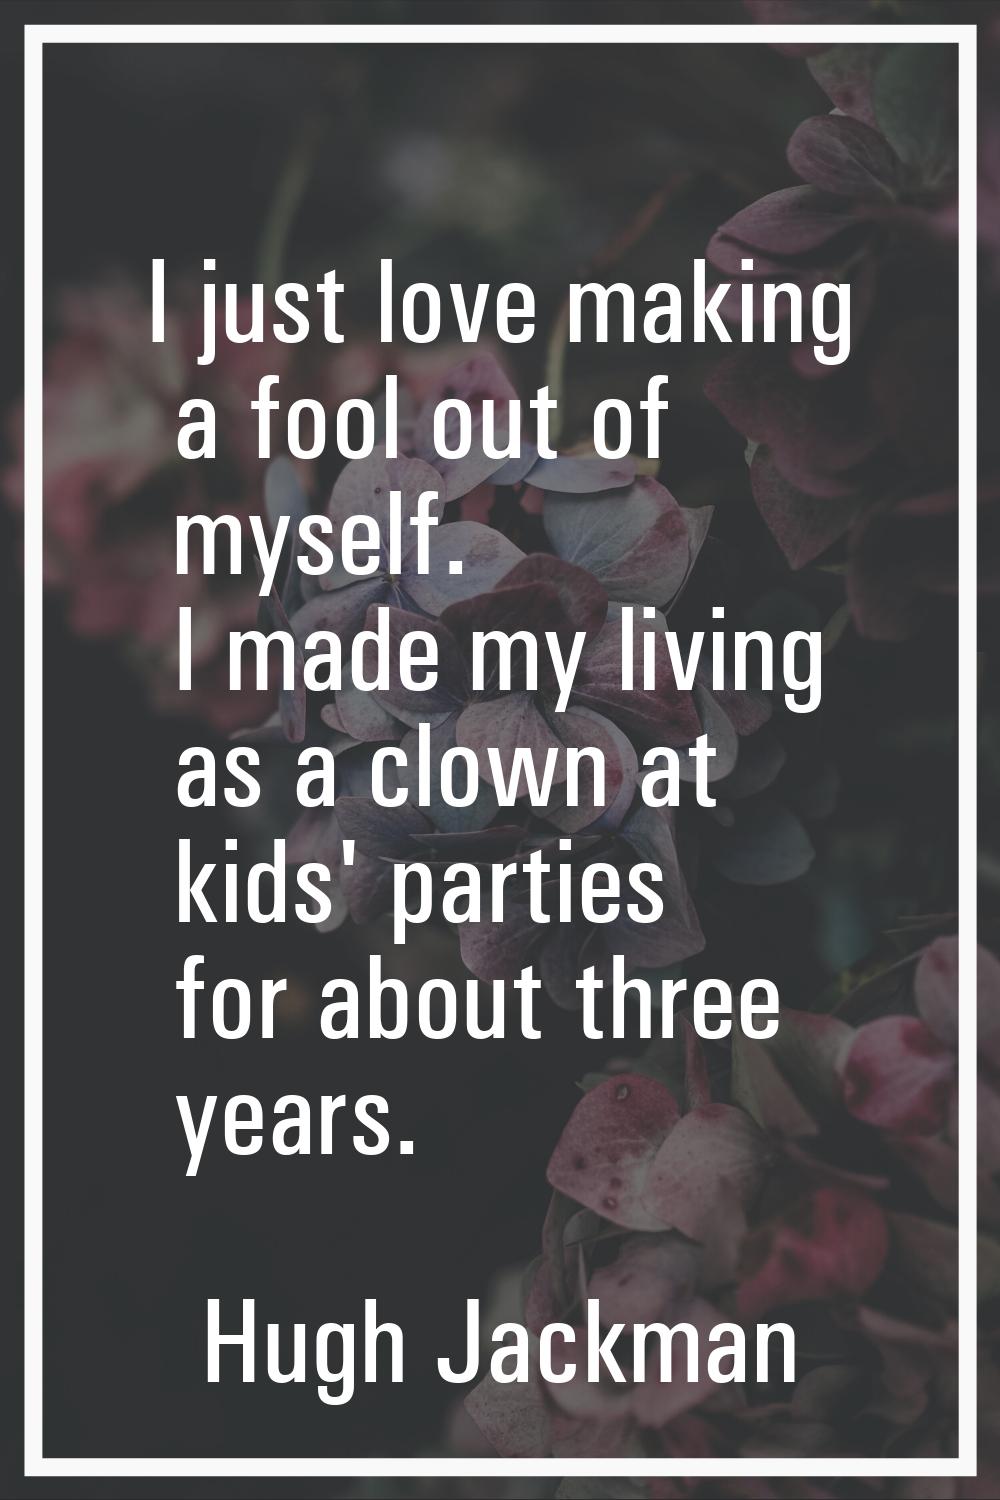 I just love making a fool out of myself. I made my living as a clown at kids' parties for about thr